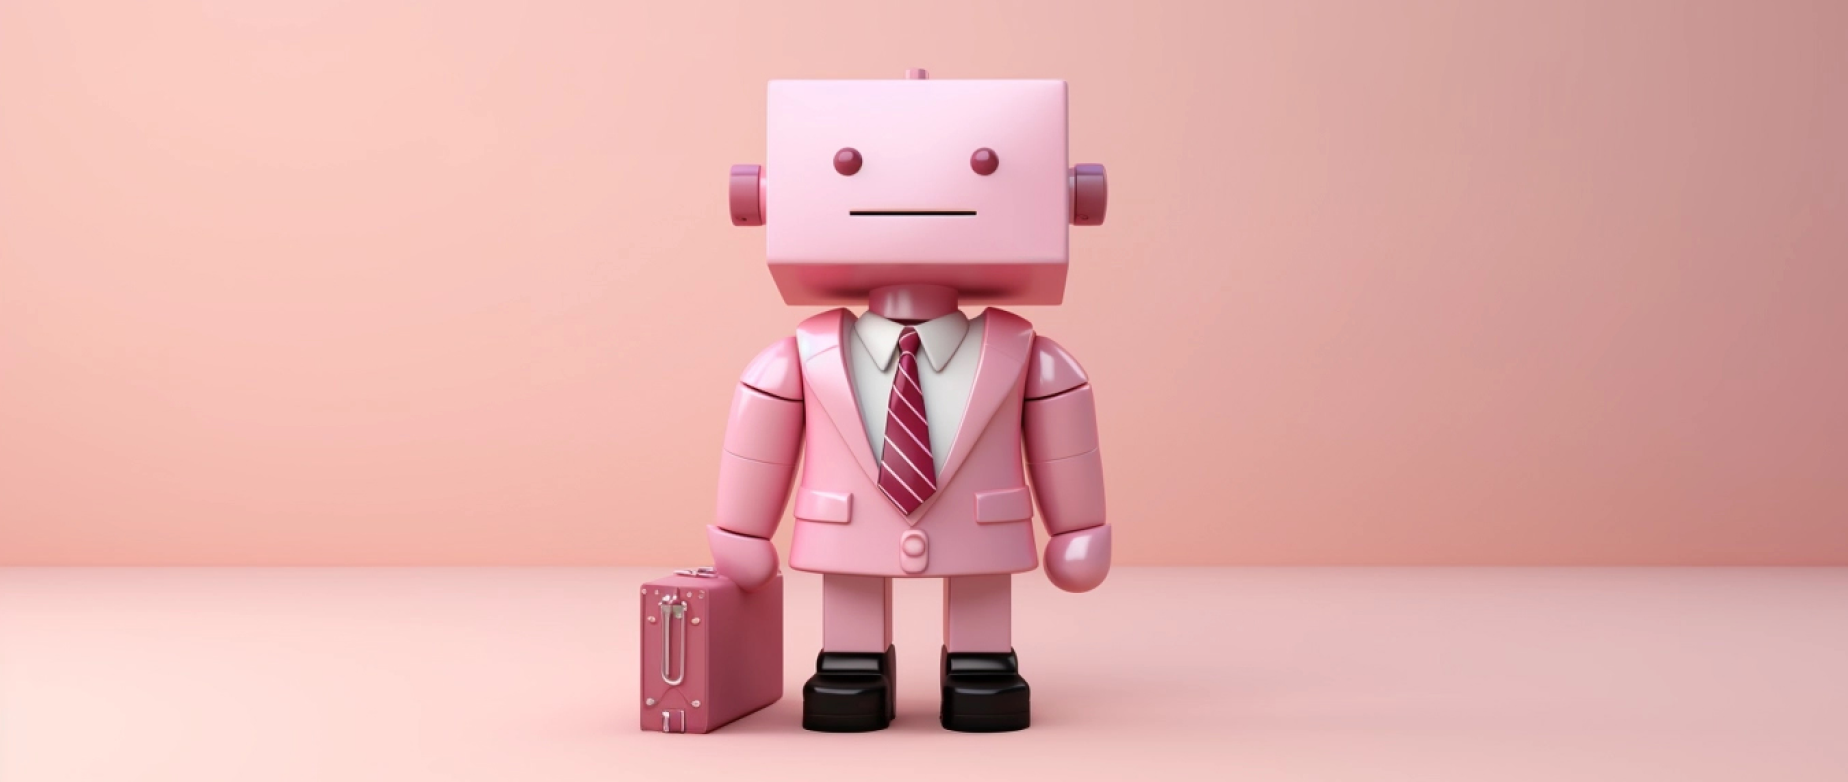 A pink robot wearing a suit and holding a briefcase on a light pink background.